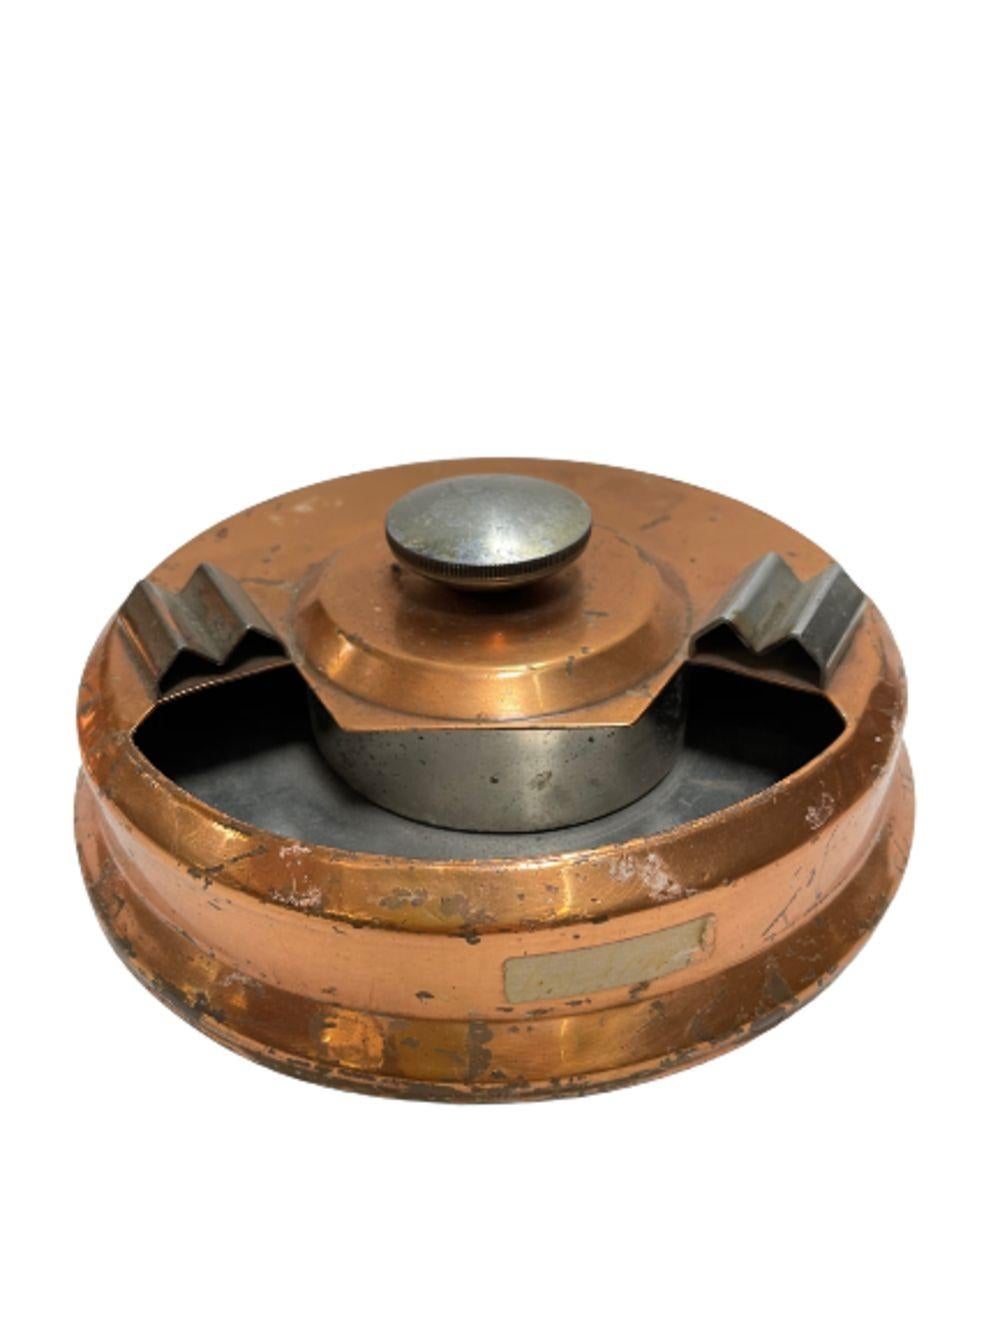 Machine Age Copper and Steel Smokeless Ashtray In Good Condition For Sale In Van Nuys, CA